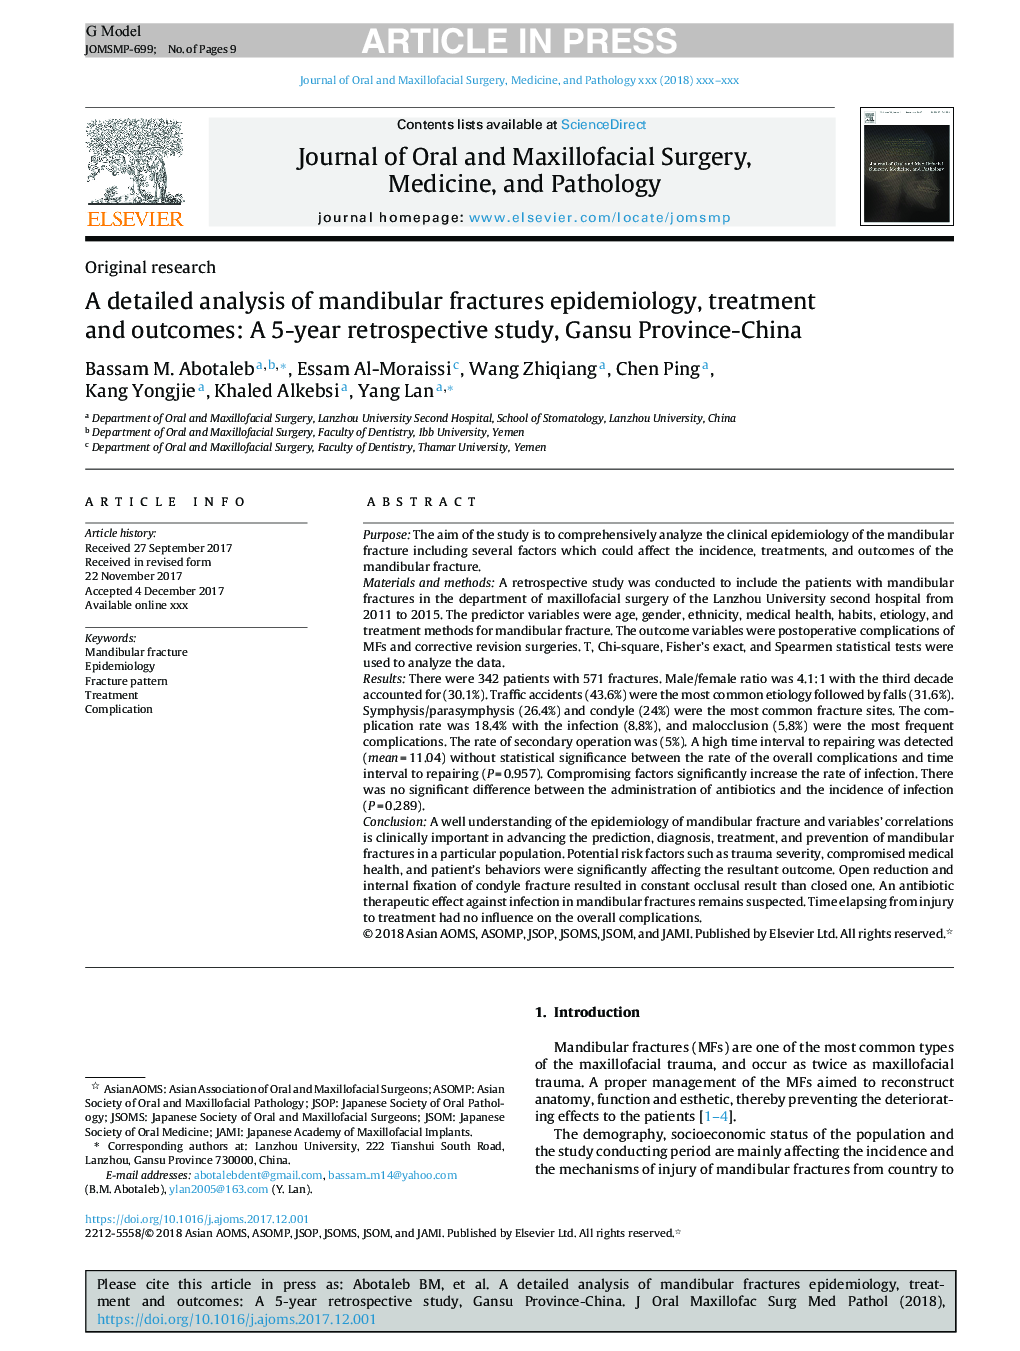 A detailed analysis of mandibular fractures epidemiology, treatment and outcomes: A 5-year retrospective study, Gansu Province-China